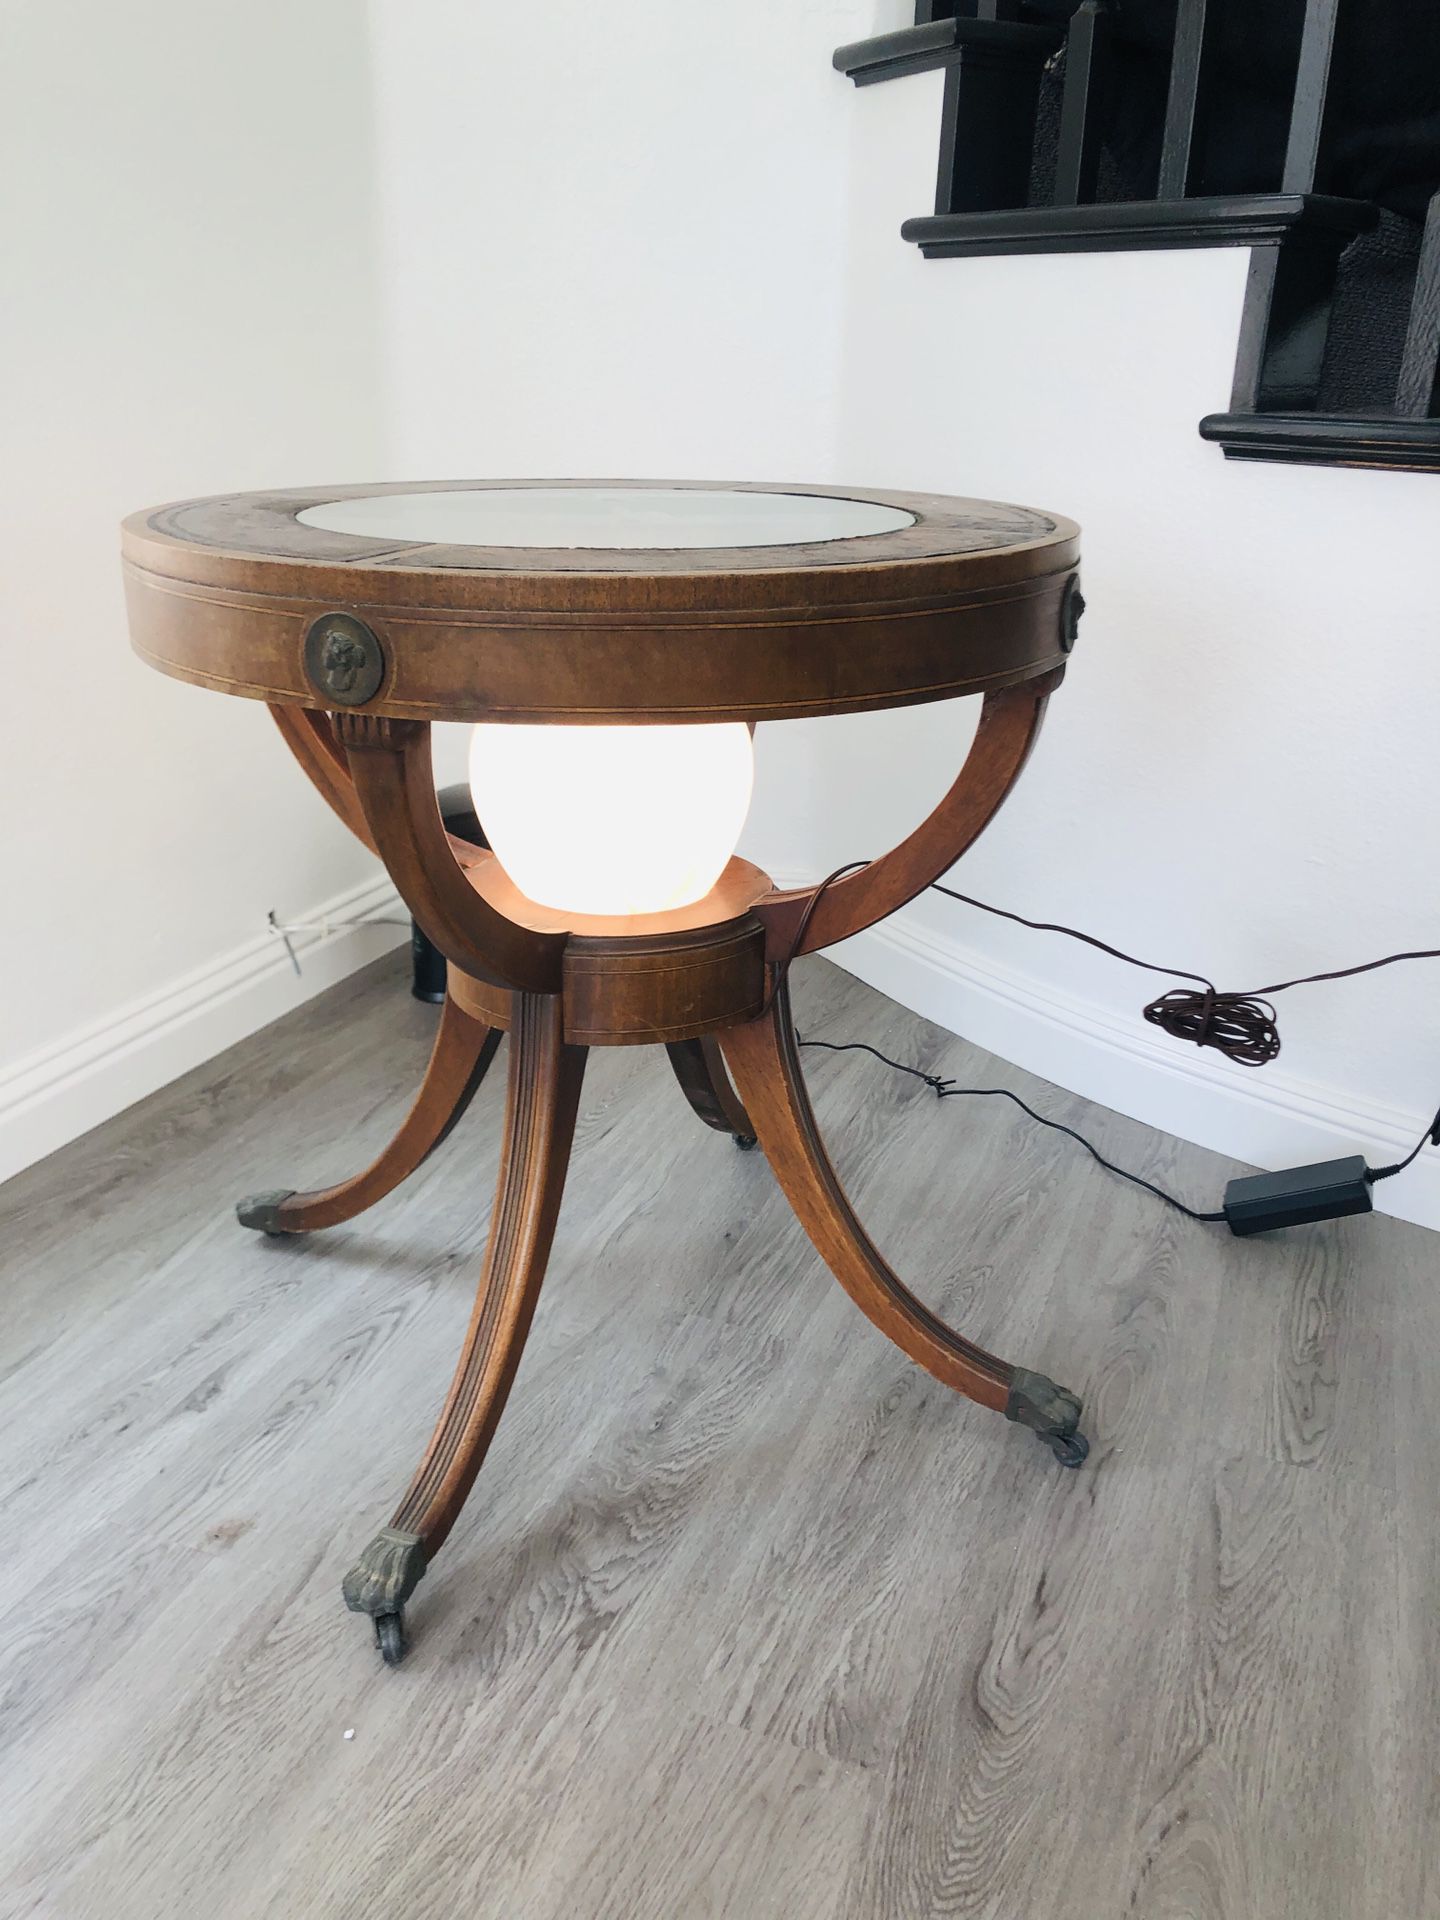 Antique table with light